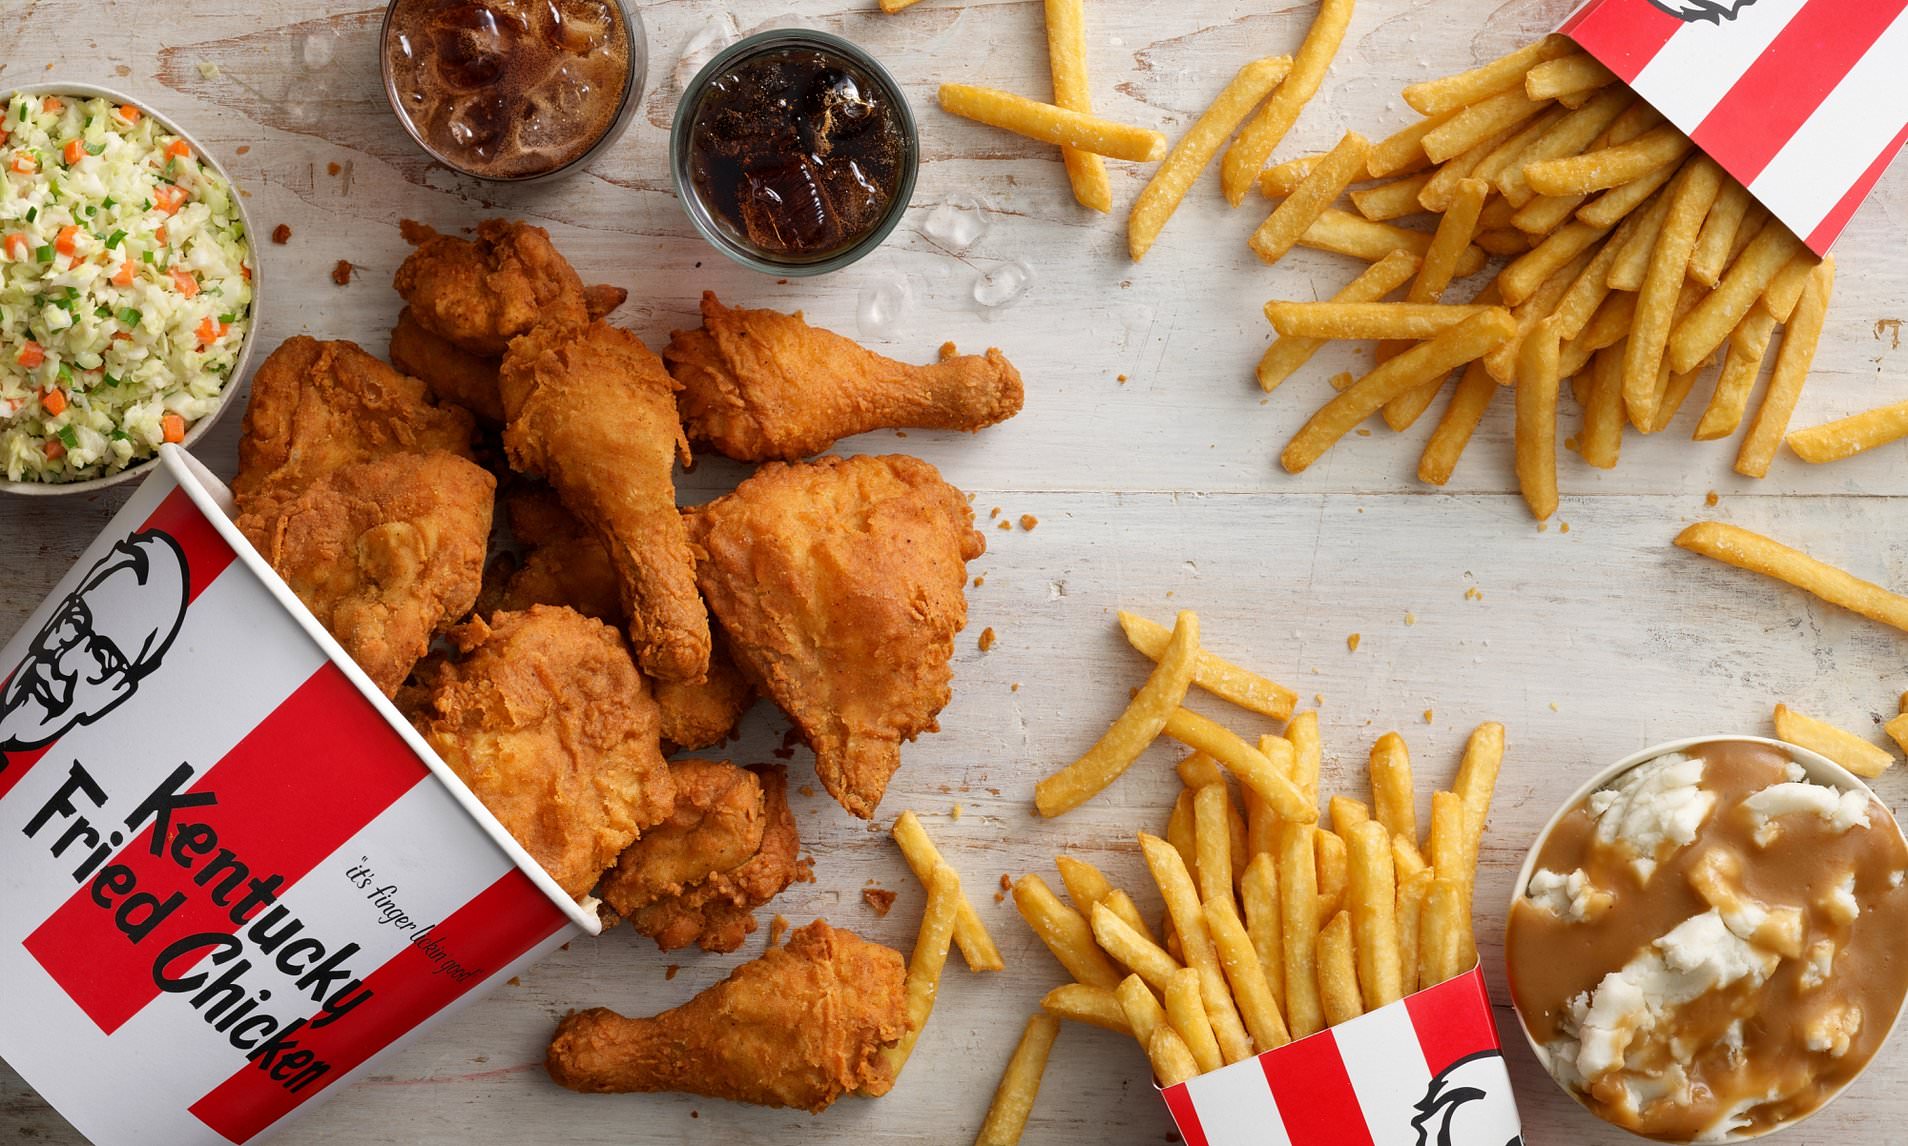 kfc-is-offering-free-delivery-this-long-weekend-boss-hunting